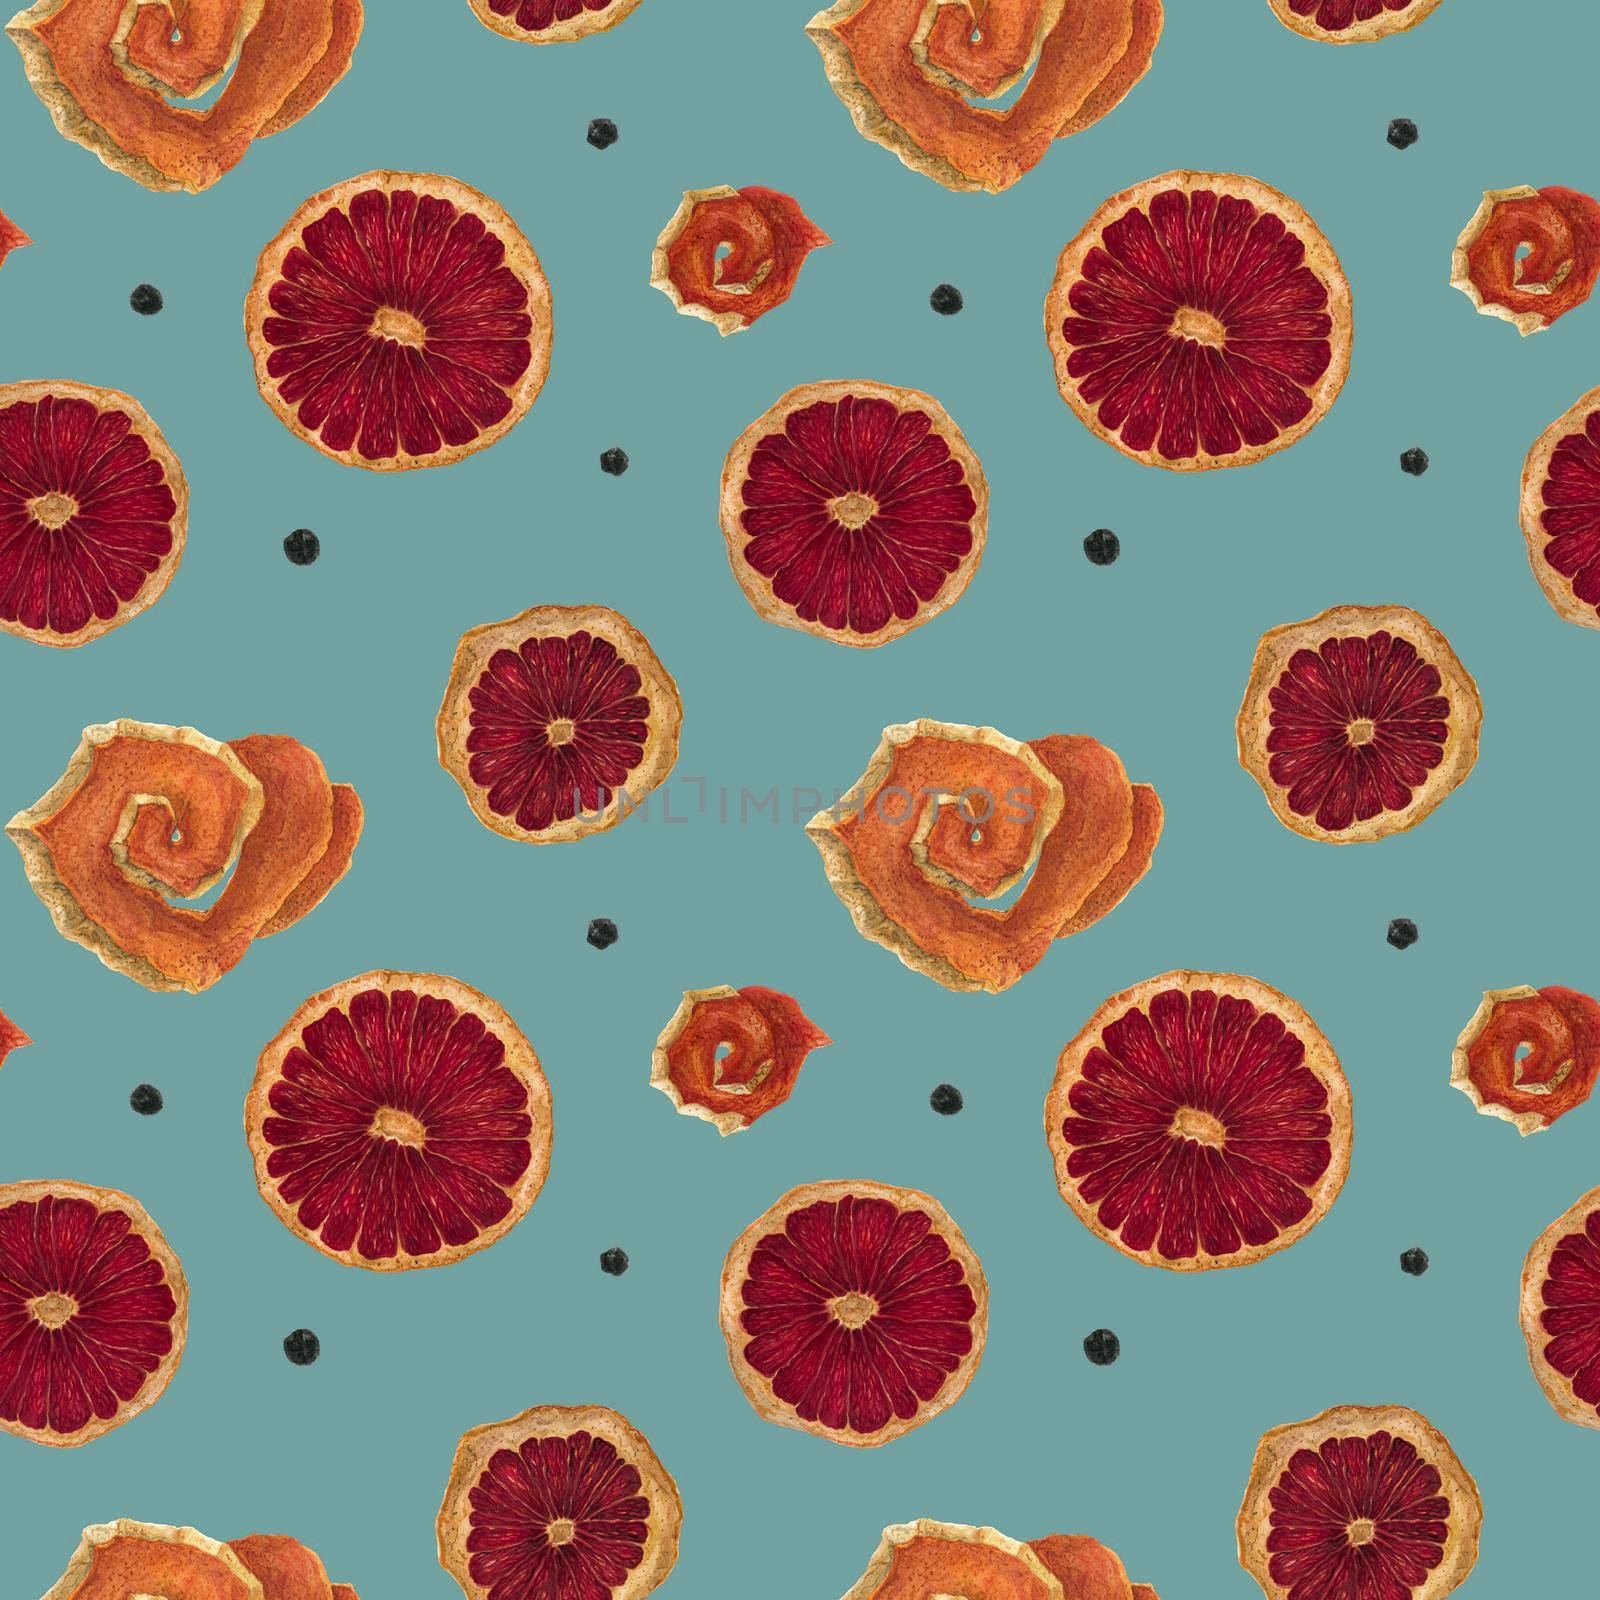 Slices of dried orange seamless pattern in vintage colors by Xeniasnowstorm